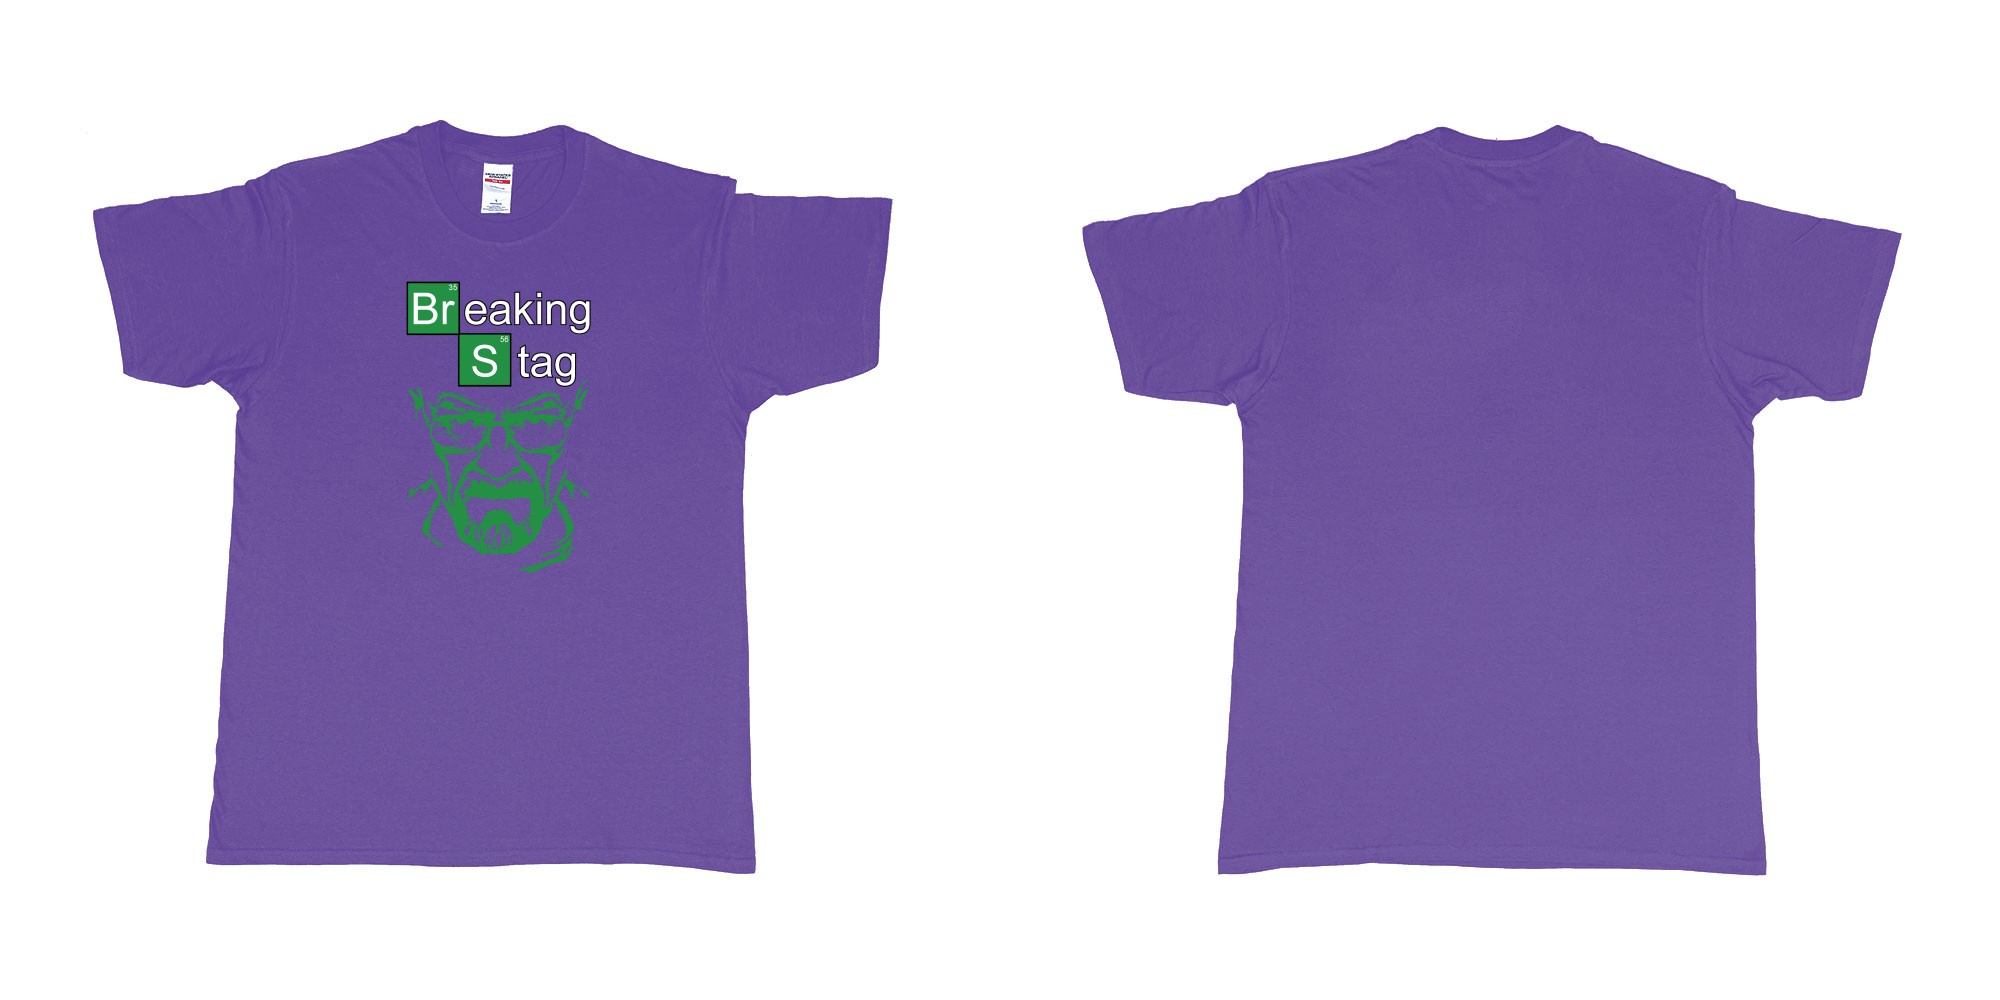 Custom tshirt design TPW Braking Bad Stag in fabric color purple choice your own text made in Bali by The Pirate Way